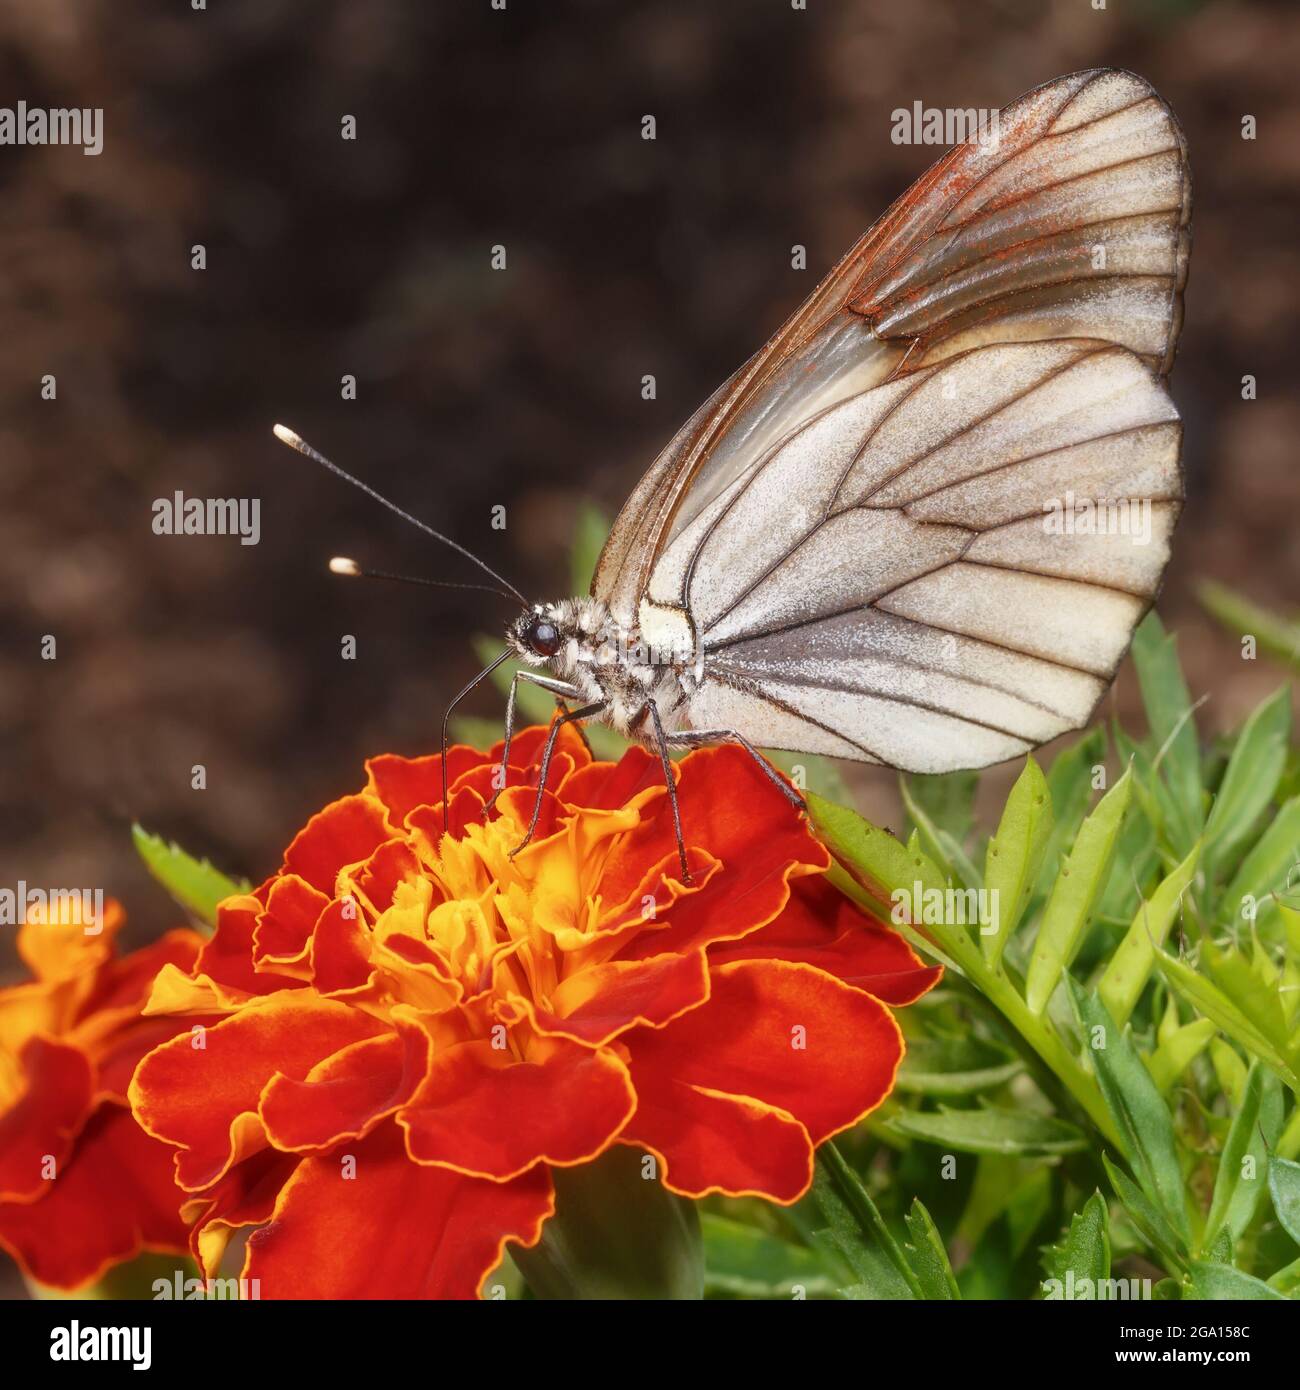 A cabbage butterfly feeds on nectar on a marigold flower. Stock Photo